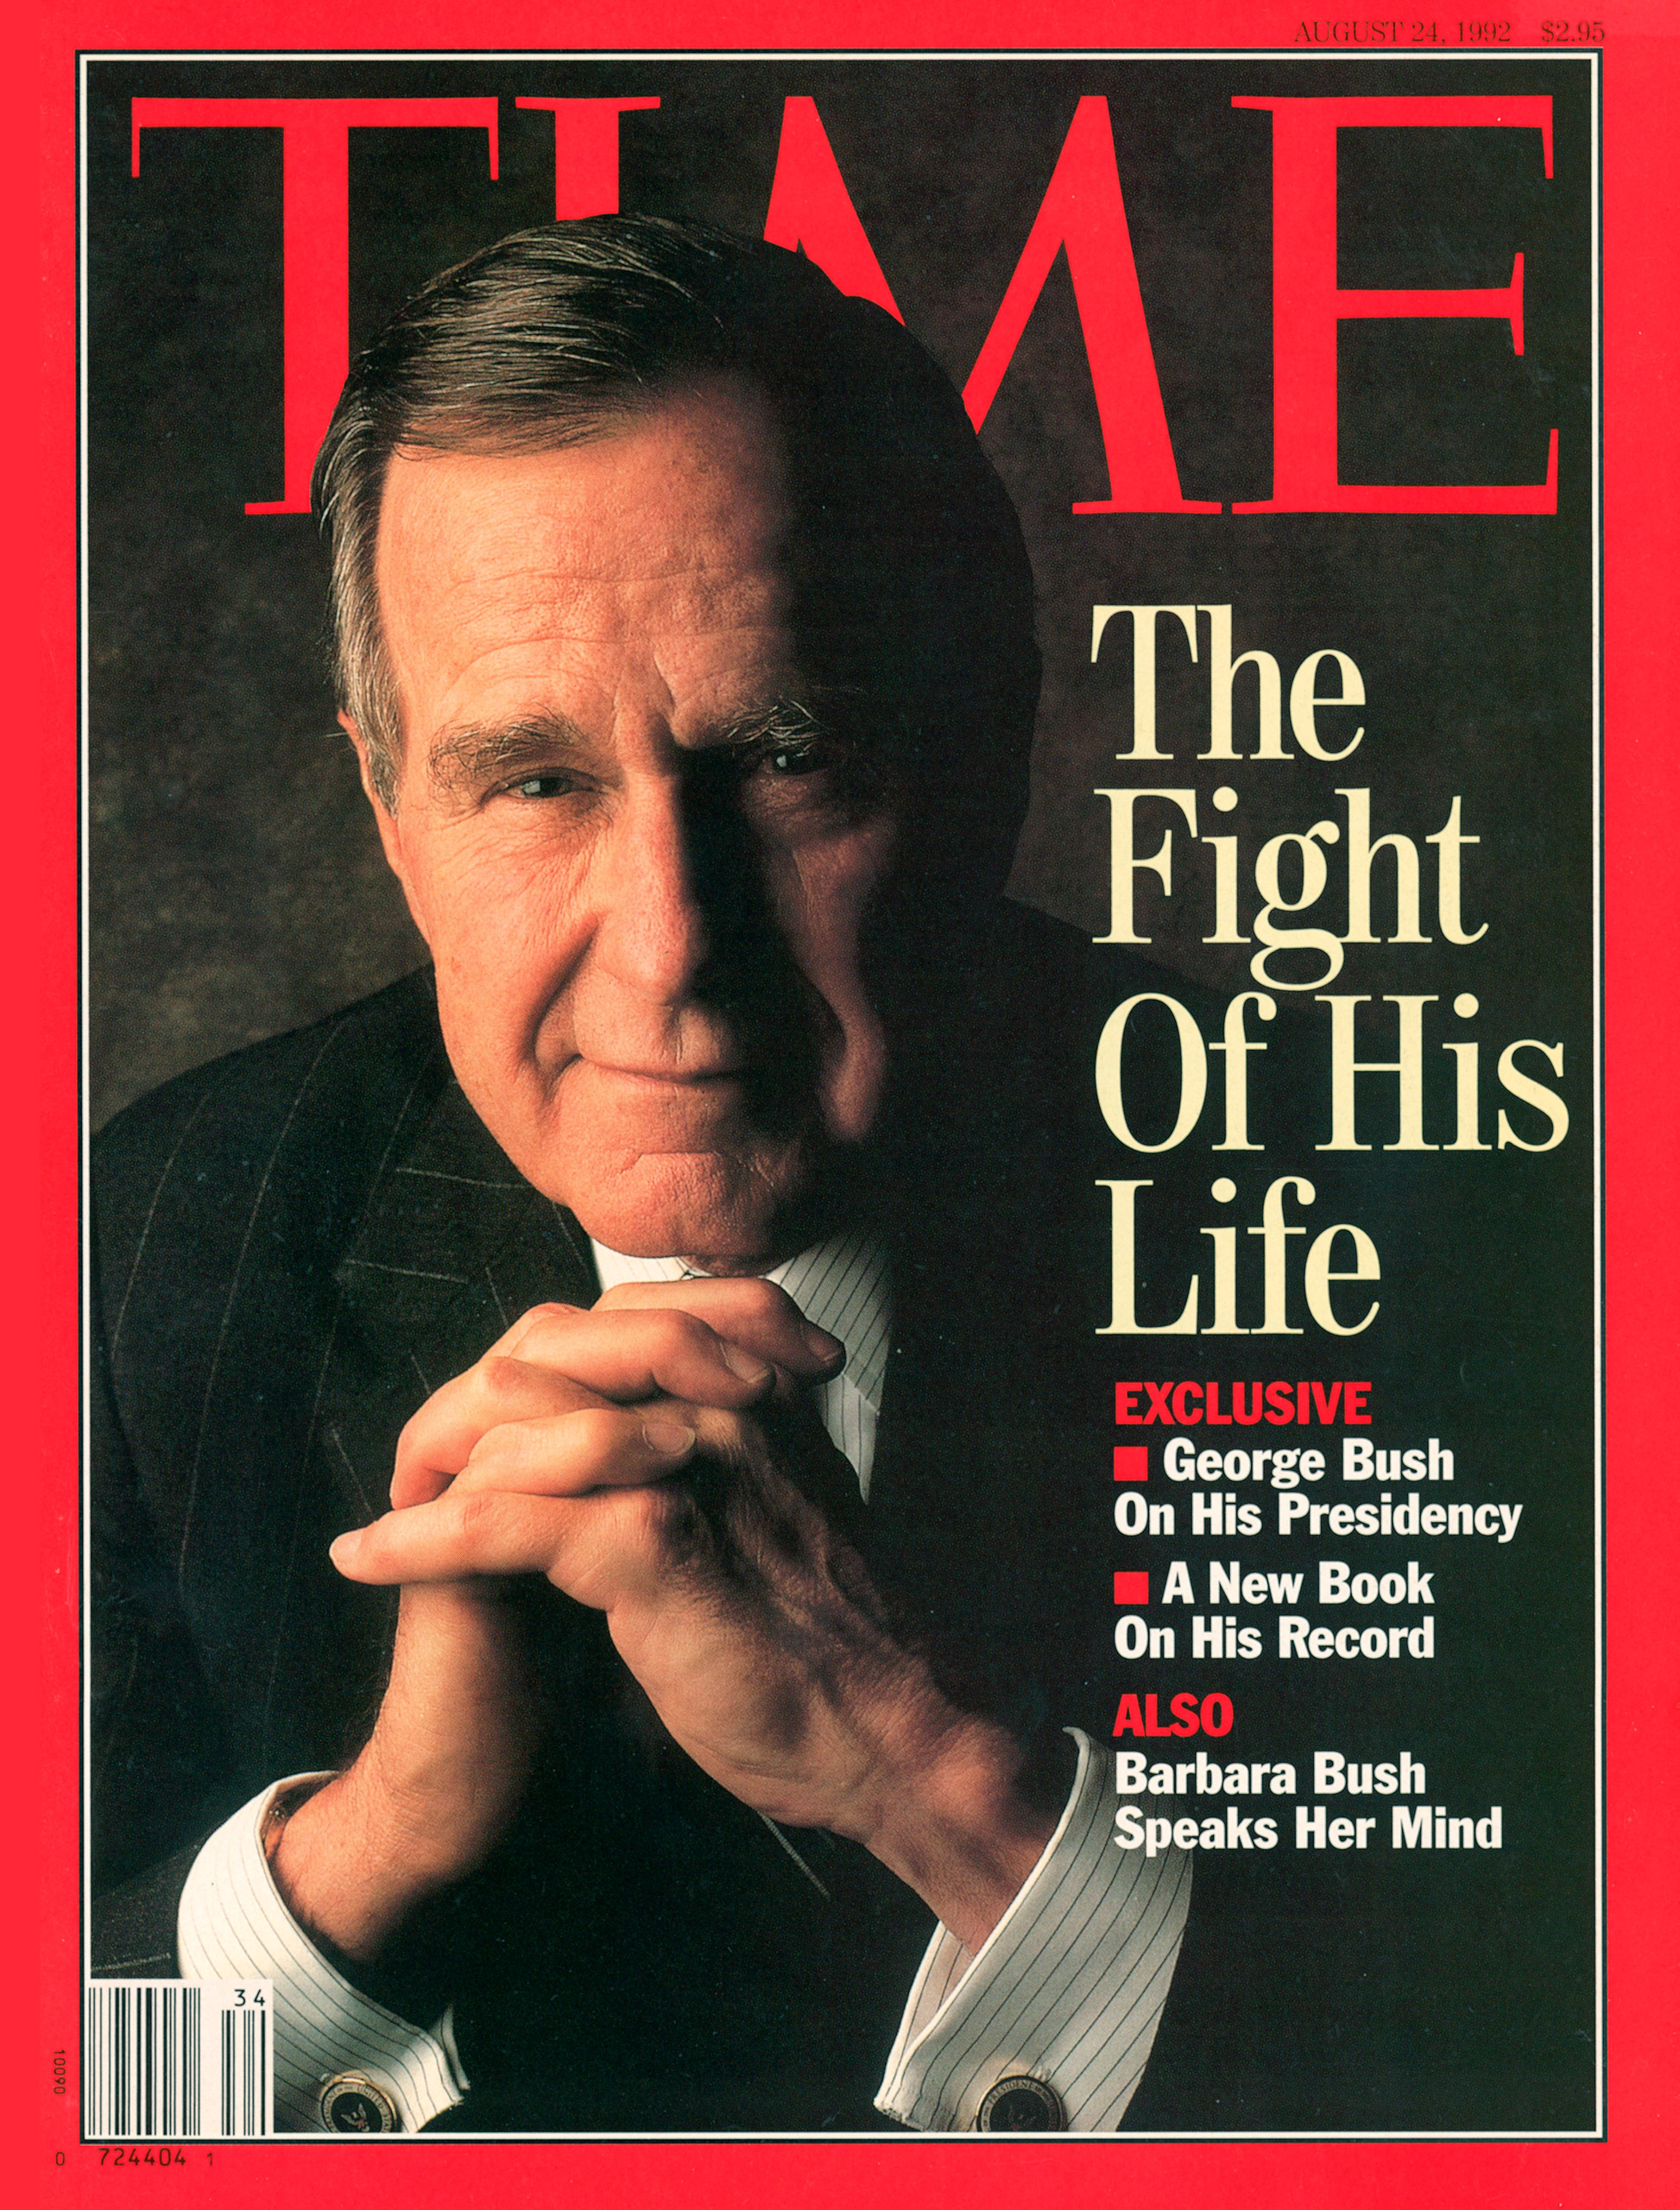 George H.W. Bush on the Aug. 24, 1992, cover of TIME. Photo credit by William Coupon.